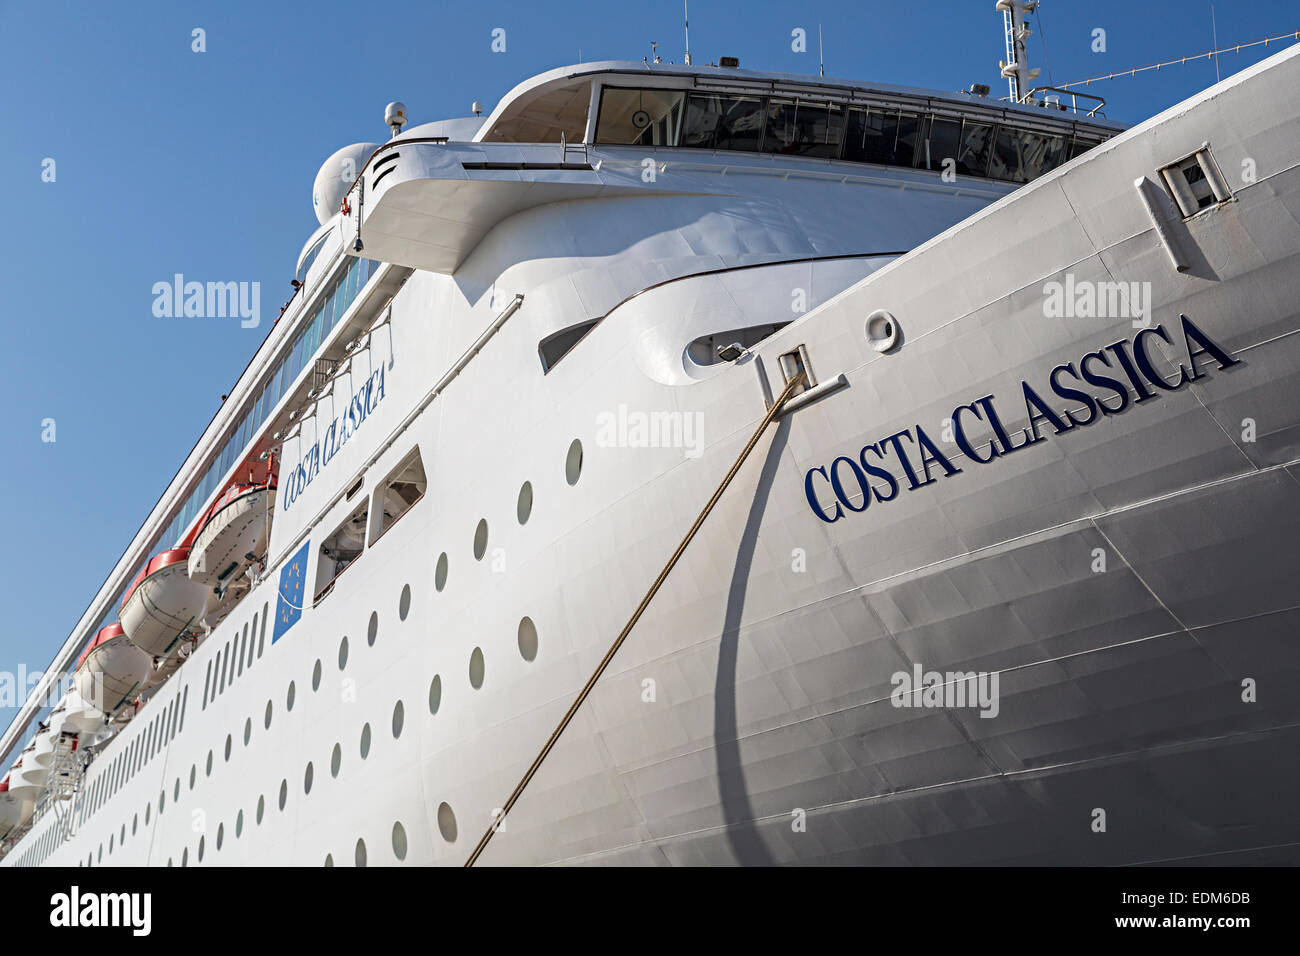 Costa Classica cruise ship moored in Trieste harbout, Italy Stock Photo